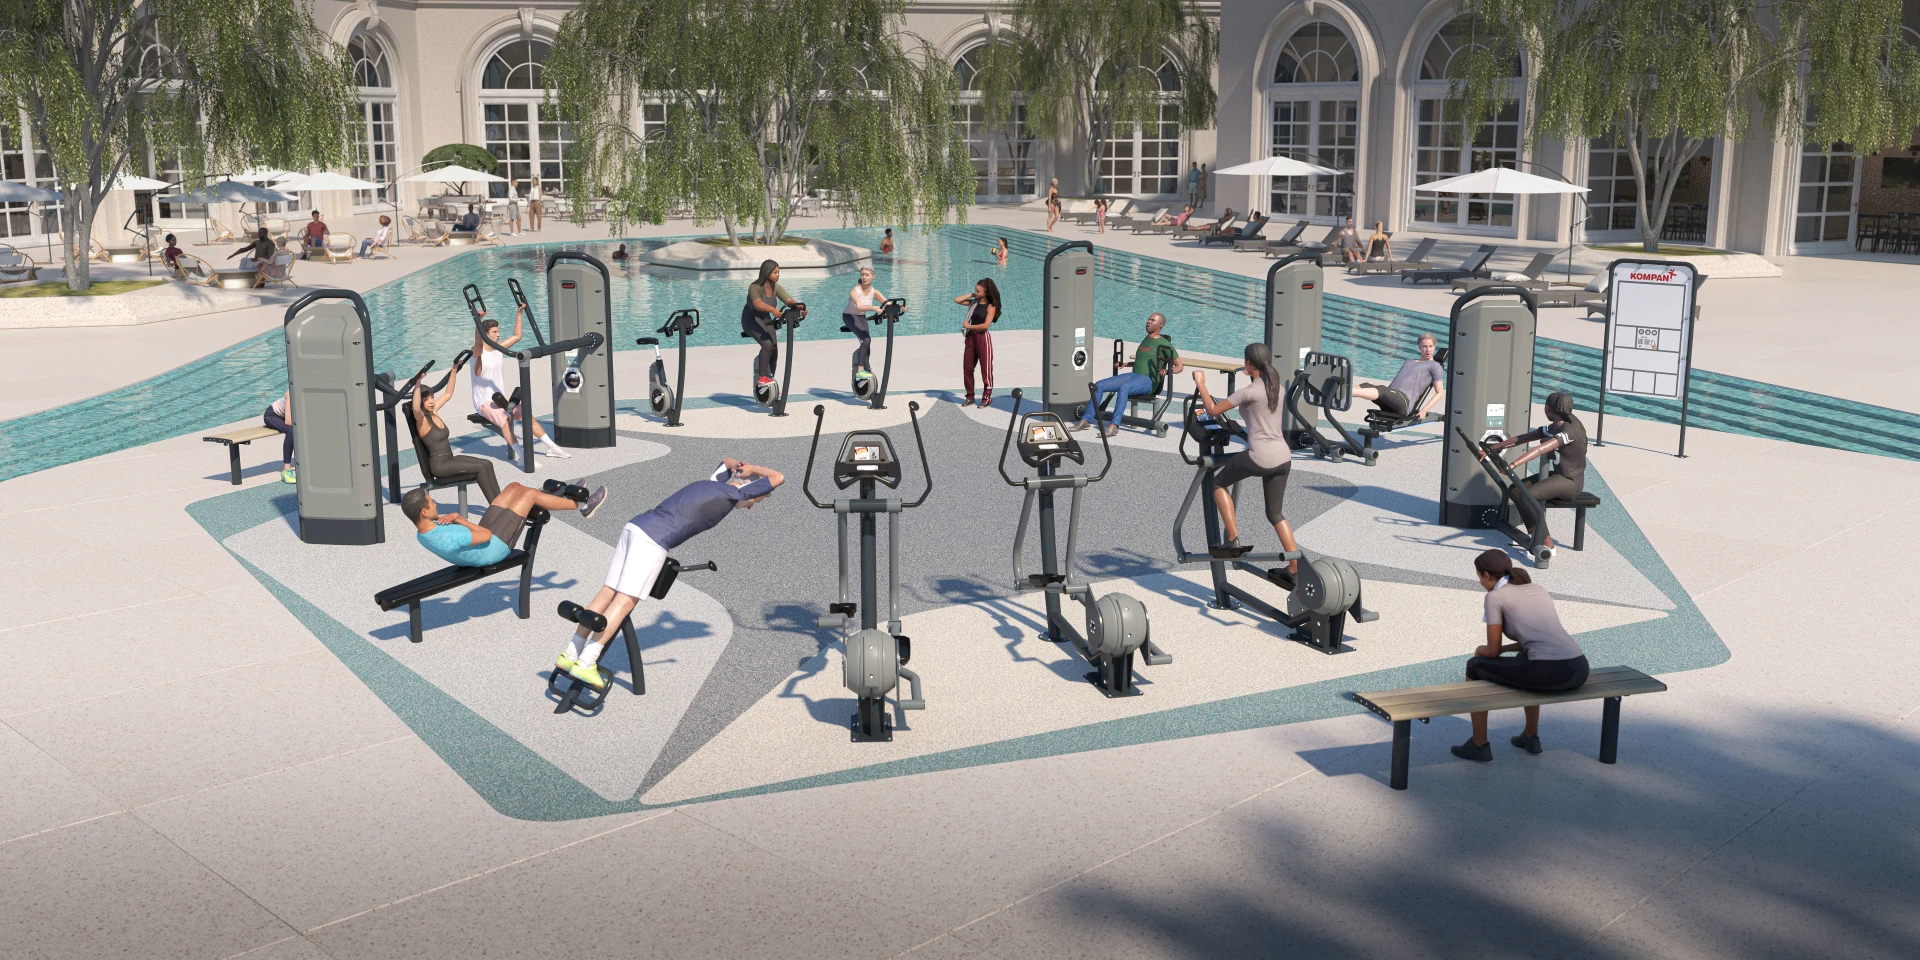 Outdoor circuit training conceptual idea for hotels